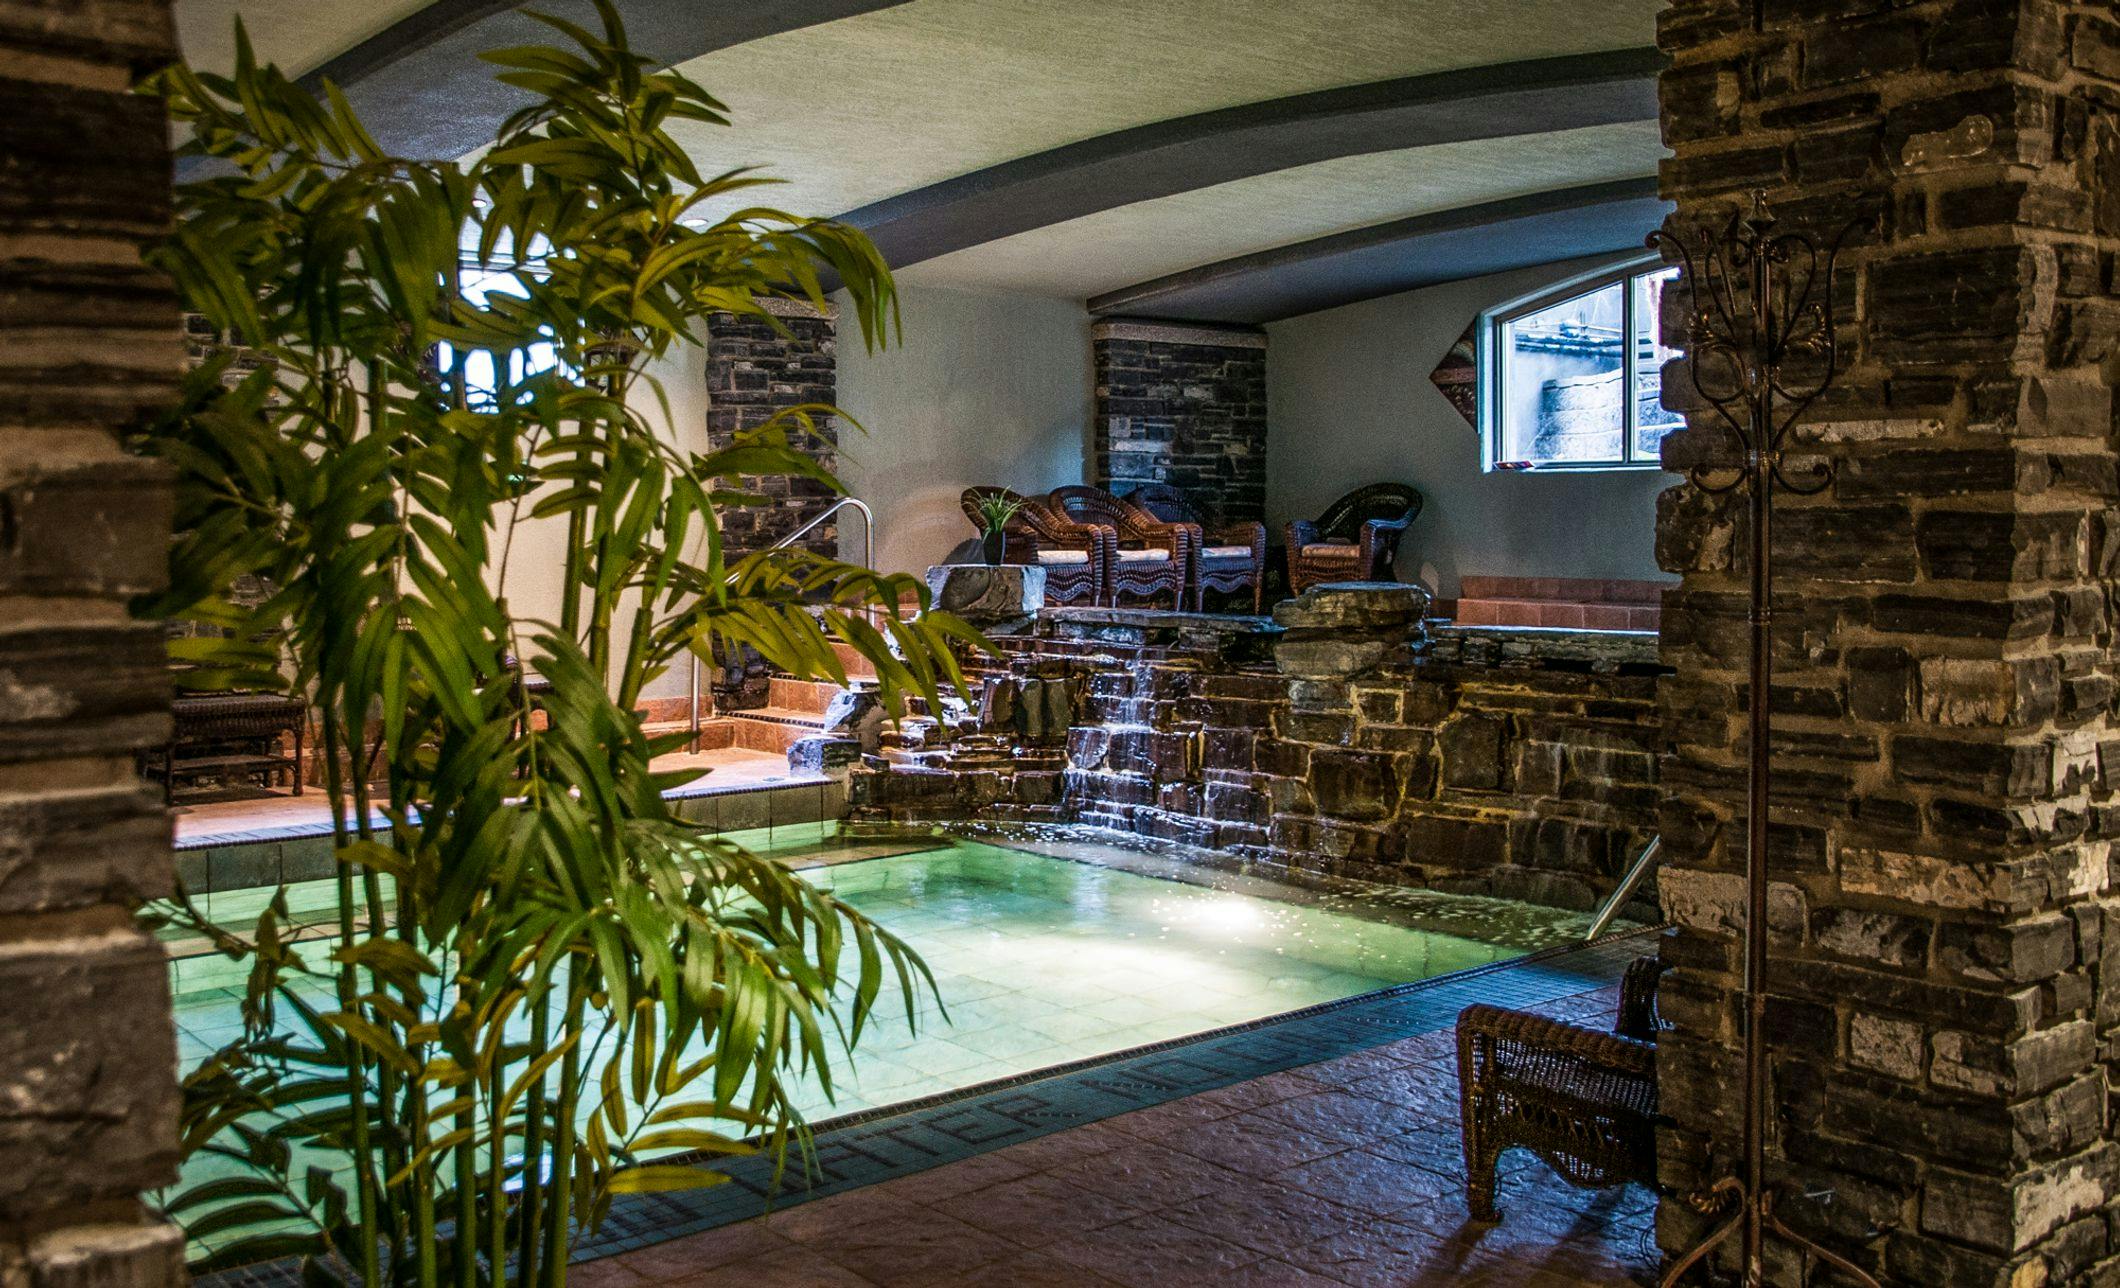 Pool with a small rock waterfall flowing into it